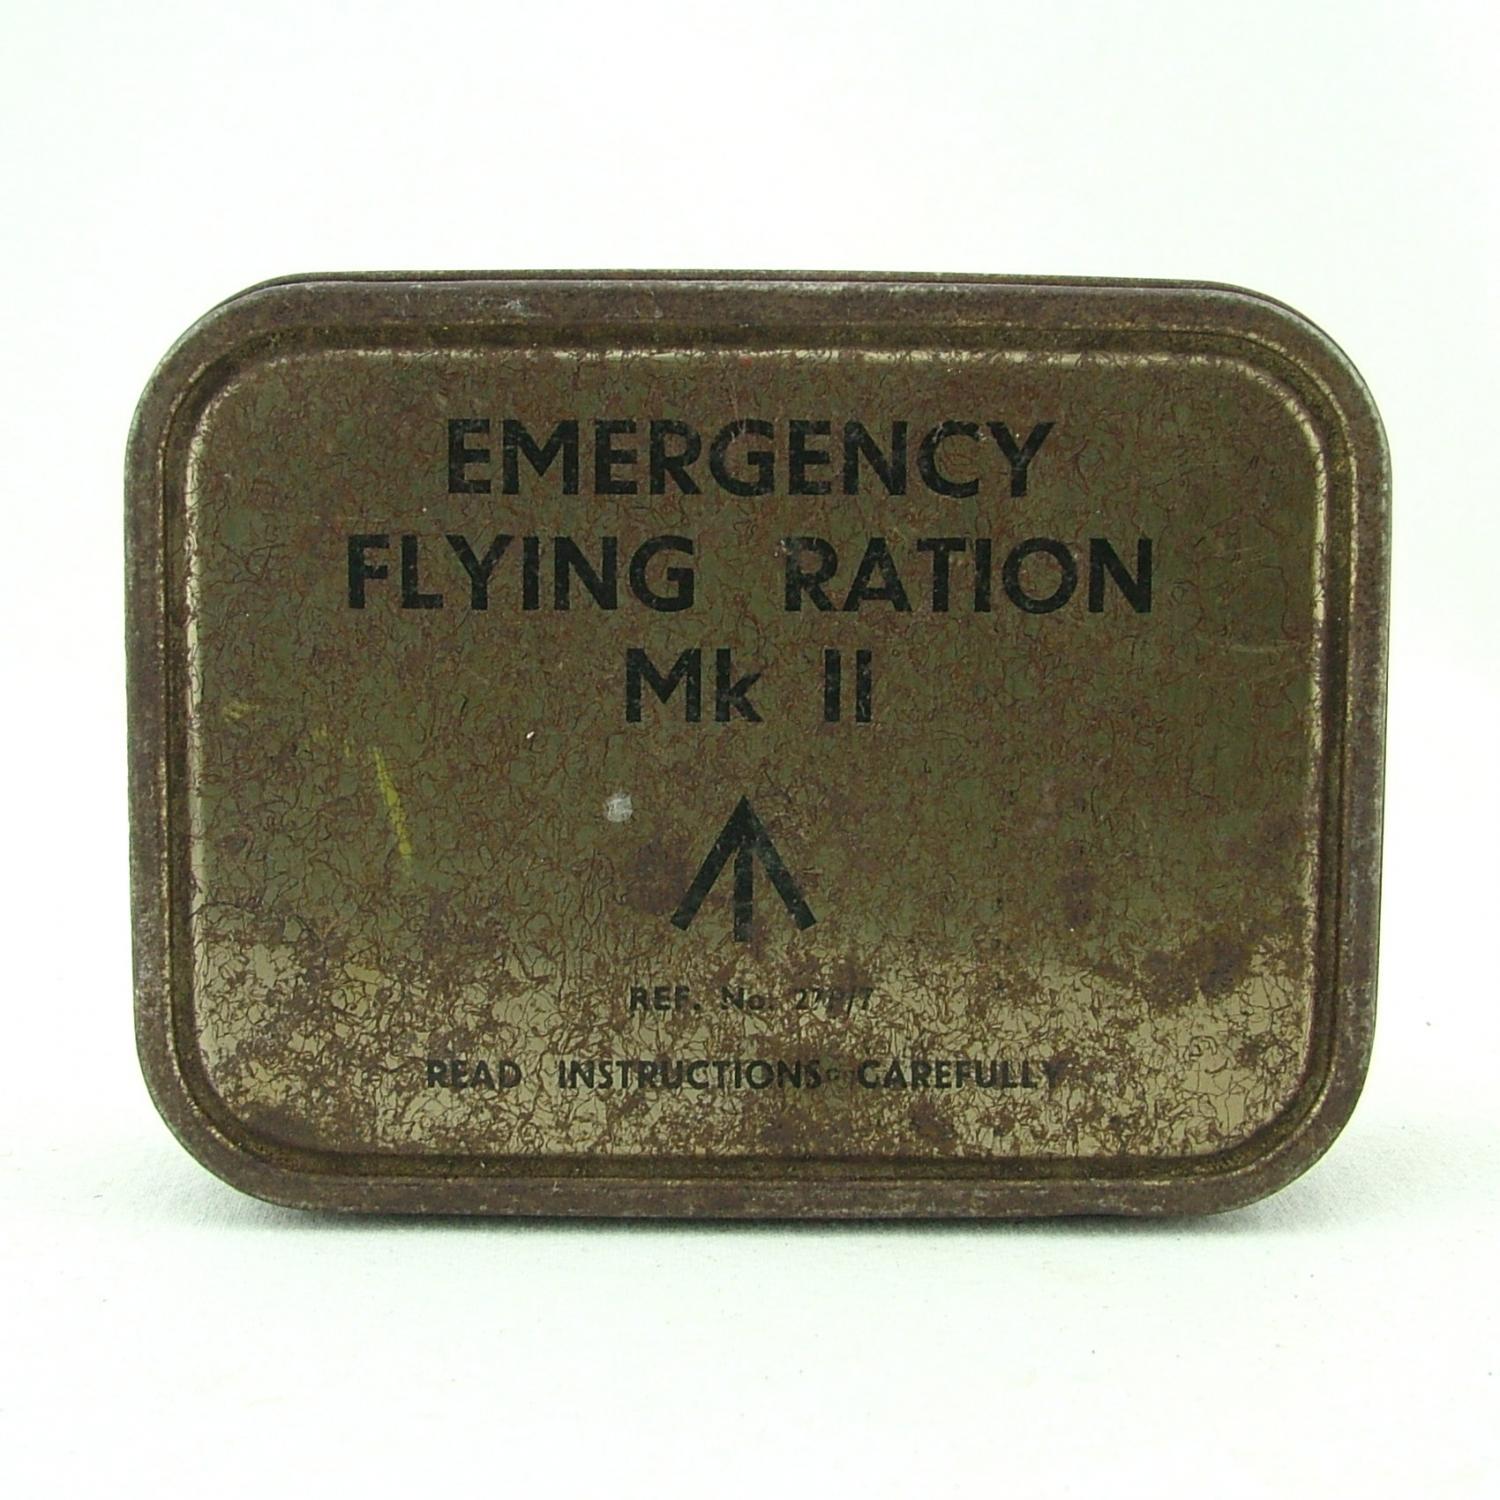 Air Ministry emergency flying ration